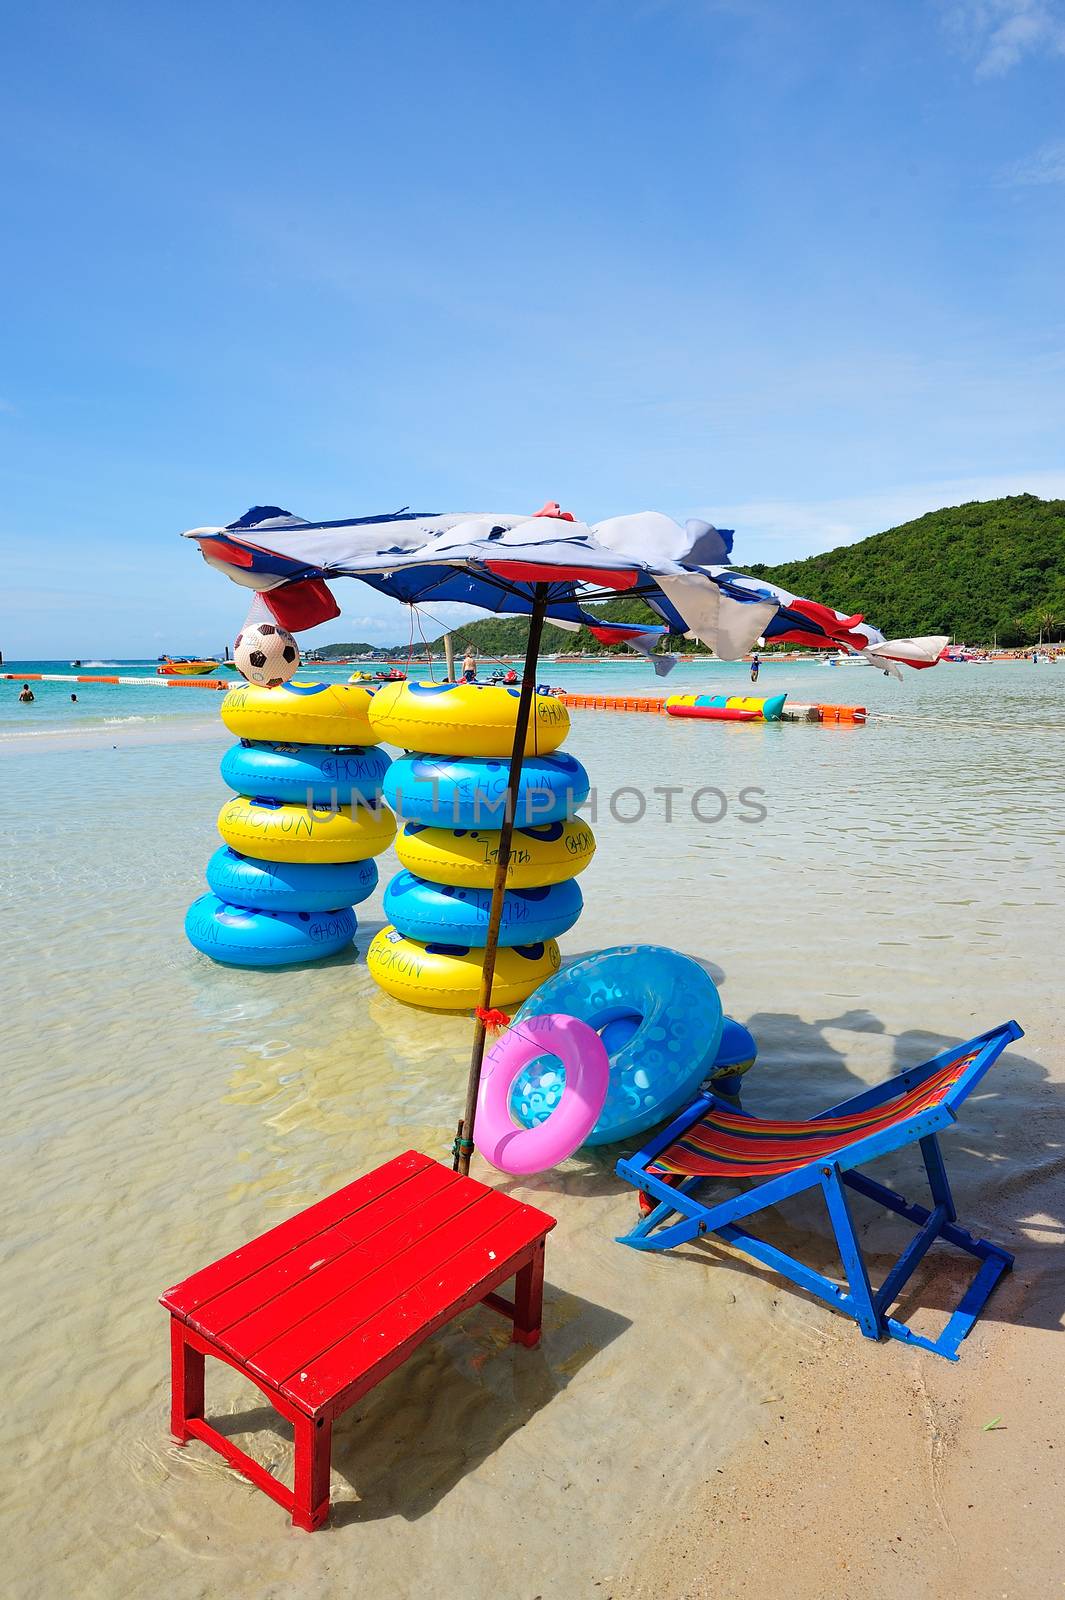 deck chairs on the beach at koh lan ,pattaya, thailand by think4photop